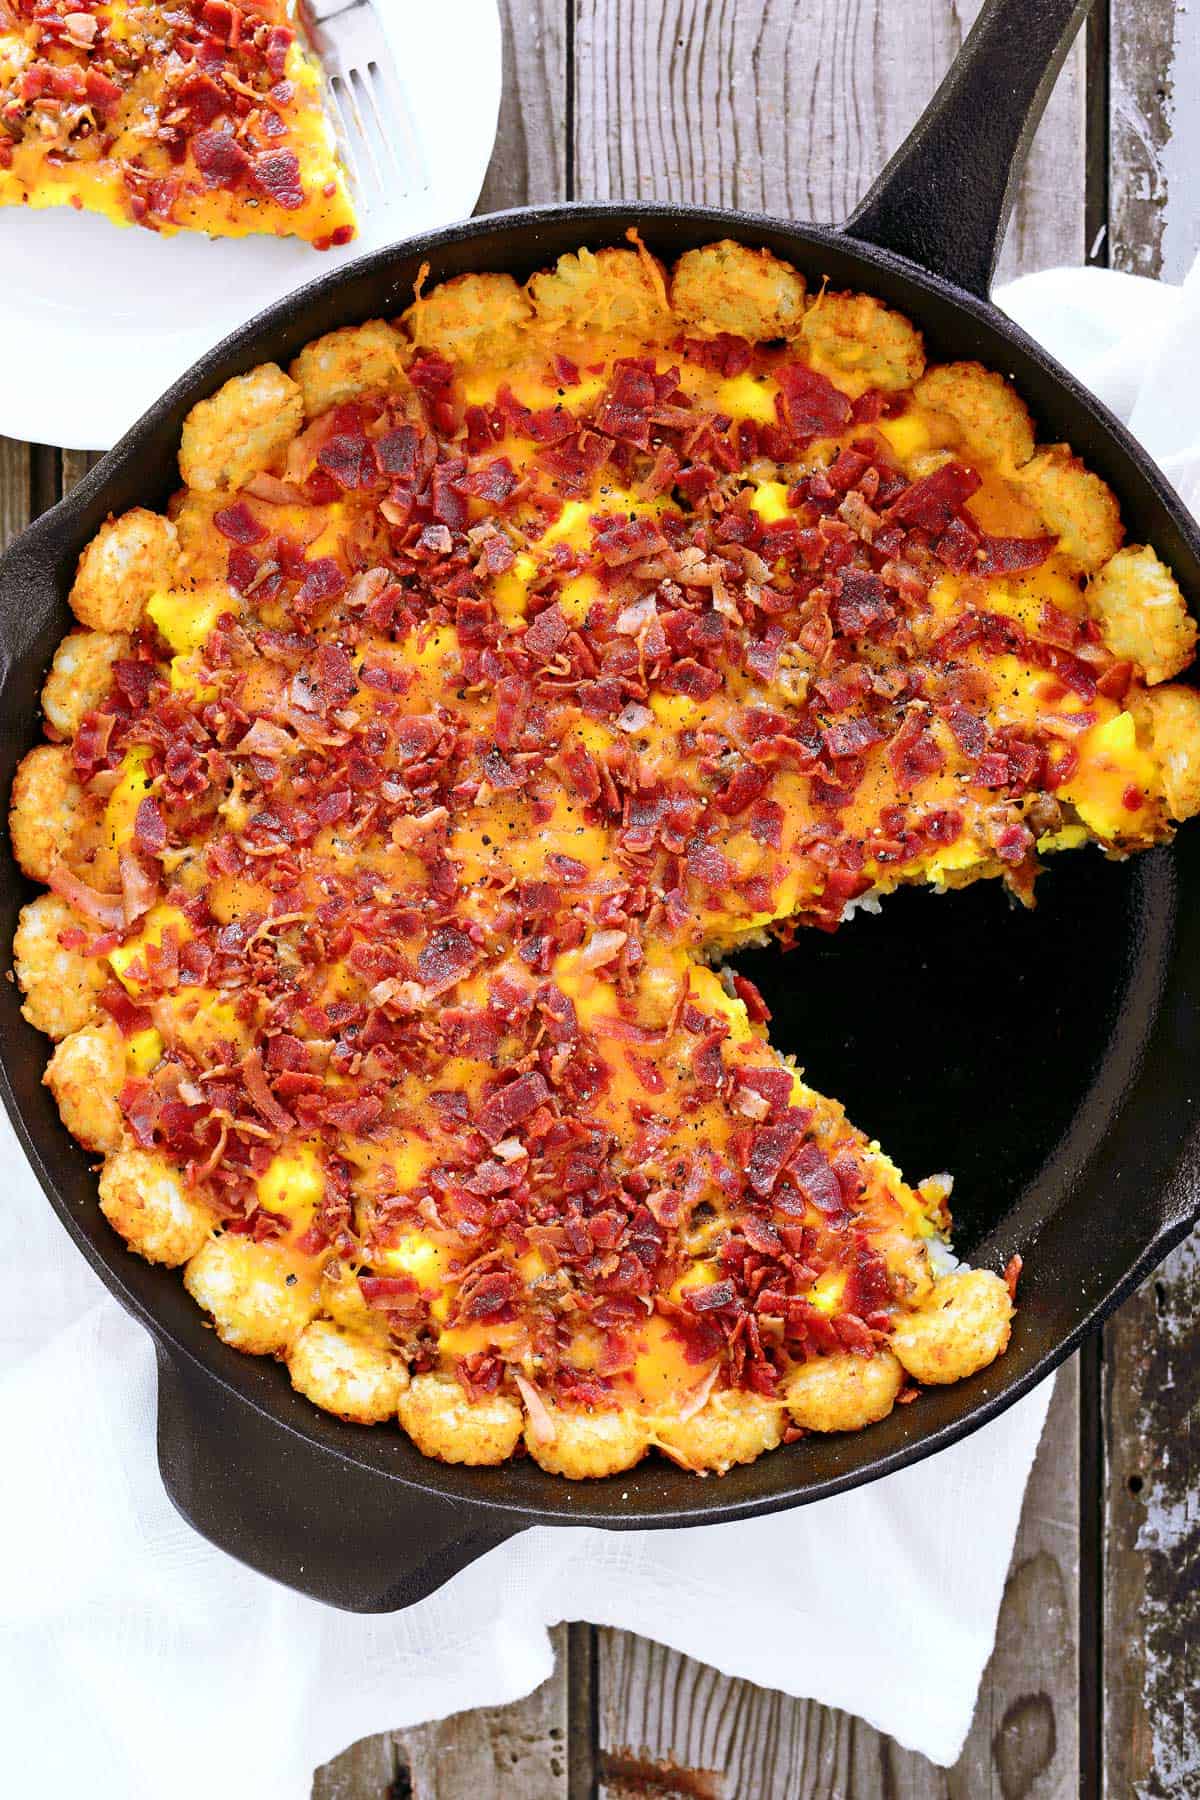 Tater tot breakfast casserole with a slice removed.